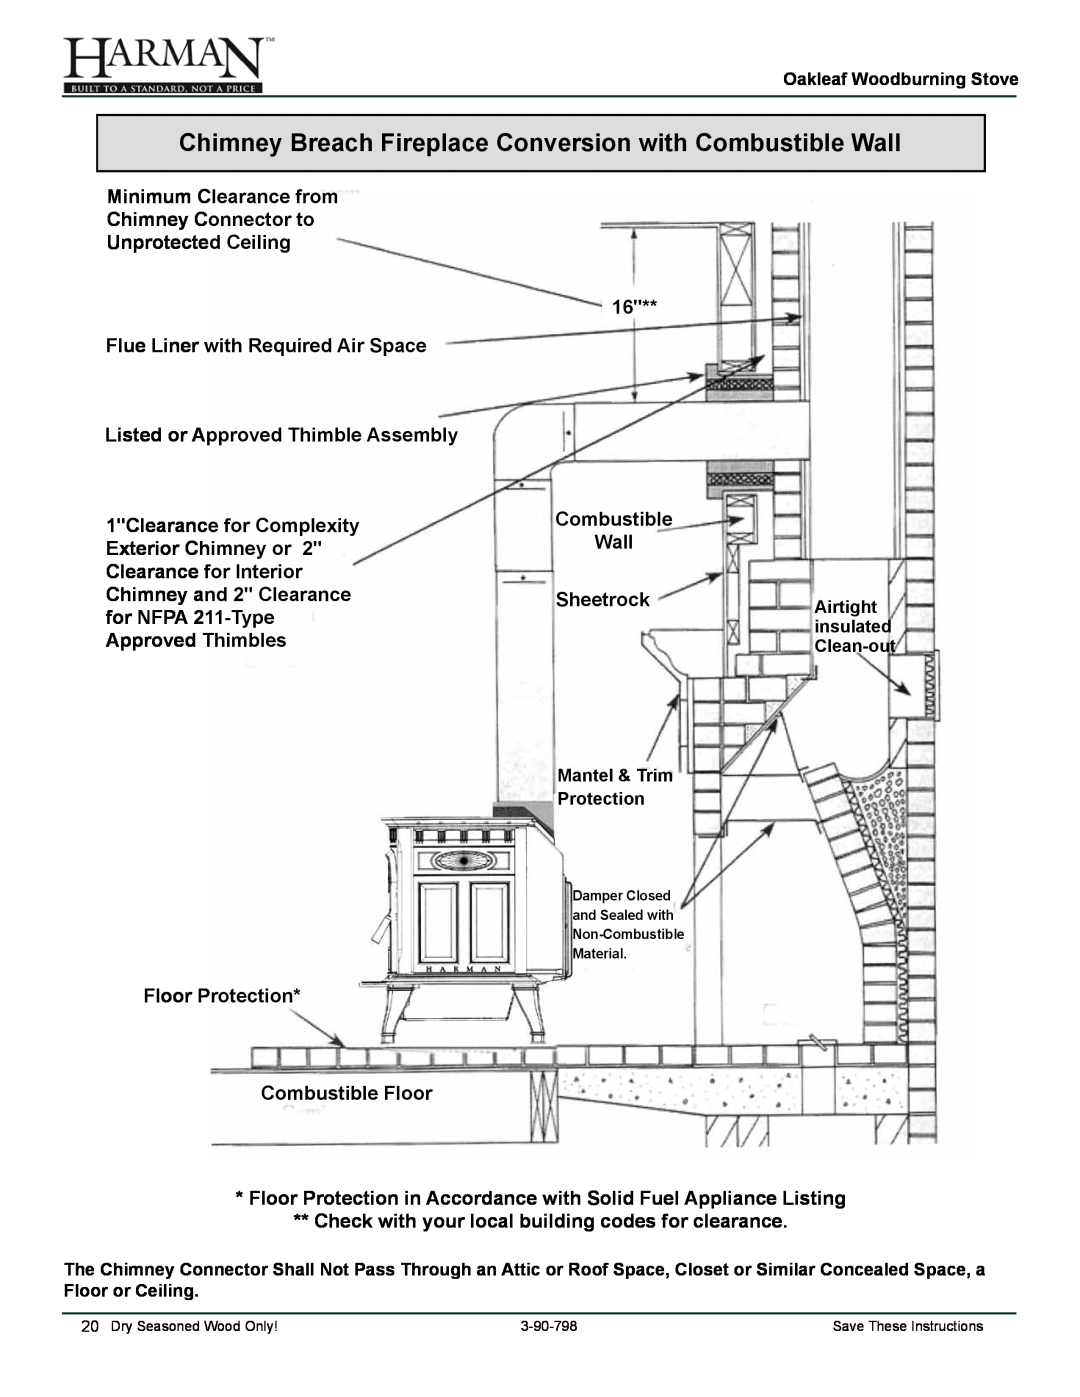 Harman Stove Company 1-90-79700 owner manual Minimum Clearance from Chimney Connector to, Unprotected Ceiling 